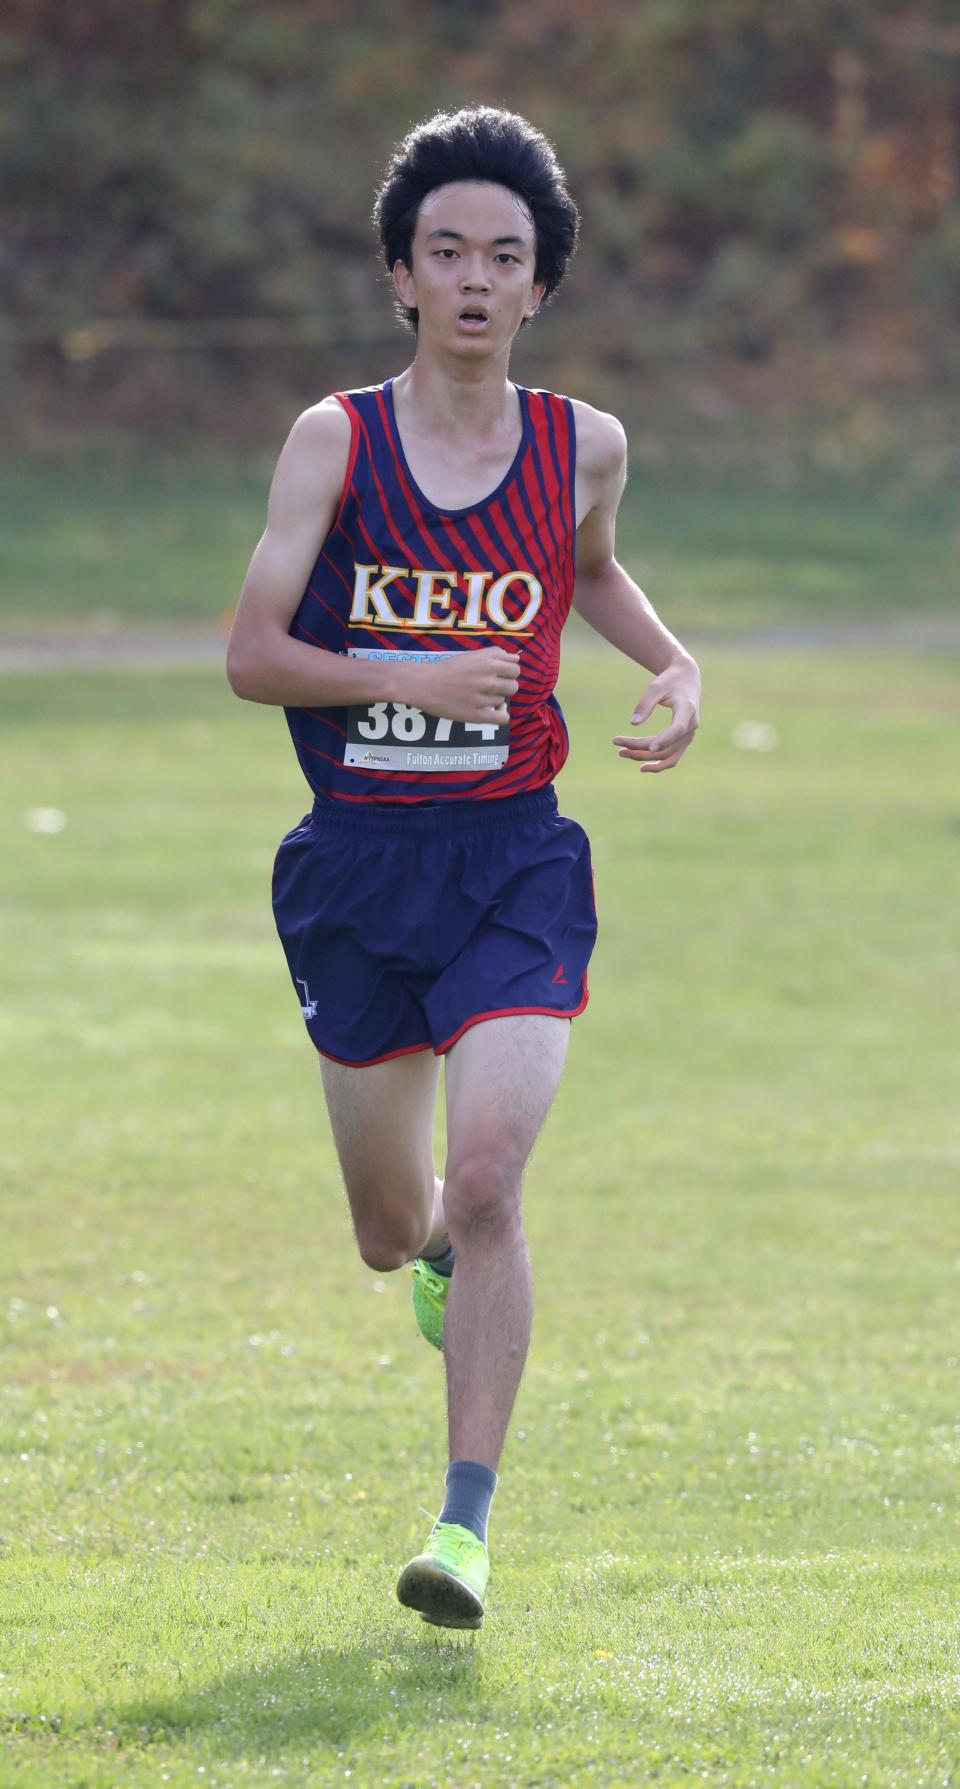 Ryosuke Kosaka from the Keio Academy of New York came in first place in the boys Class D during the Section One Cross Country Championships at Bowdoin Park in Wappingers Falls, Nov. 5, 2022